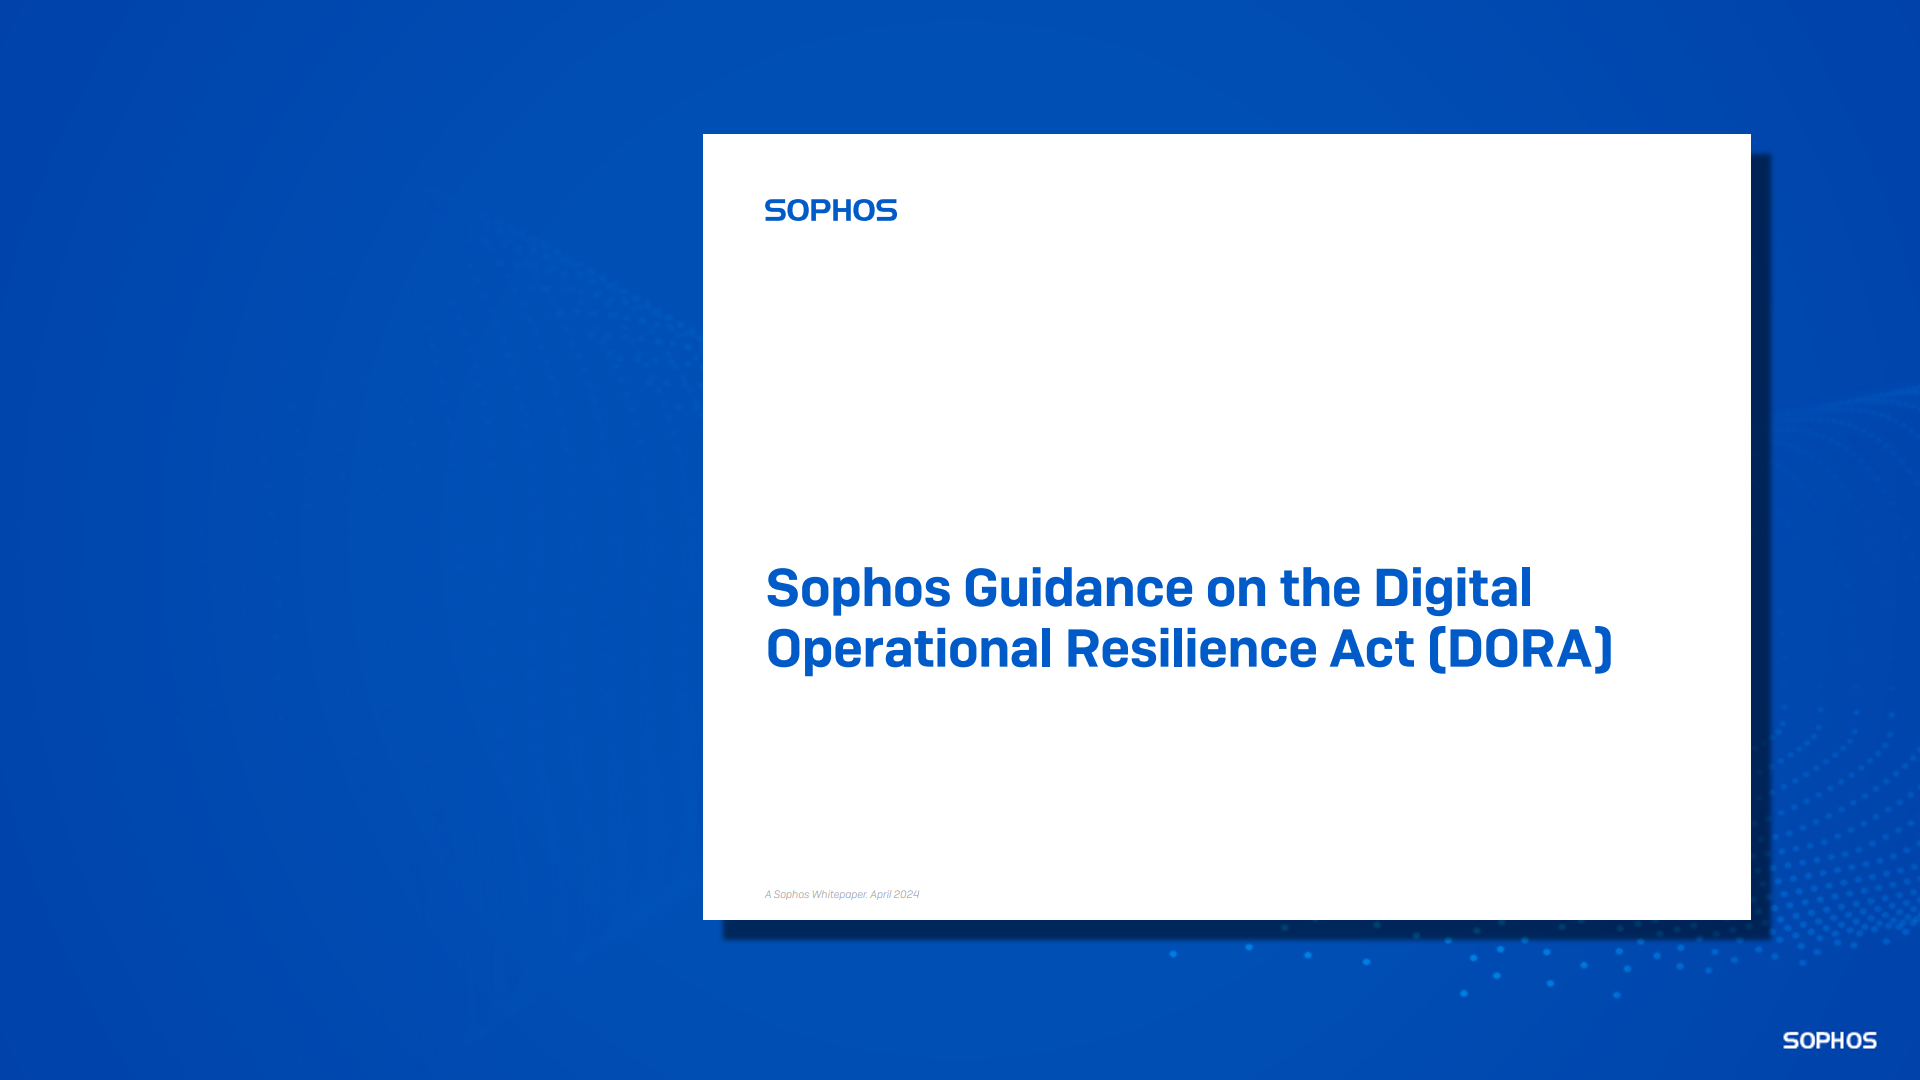 Sophos Guidance on the Digital Operational Resilience Act (DORA)